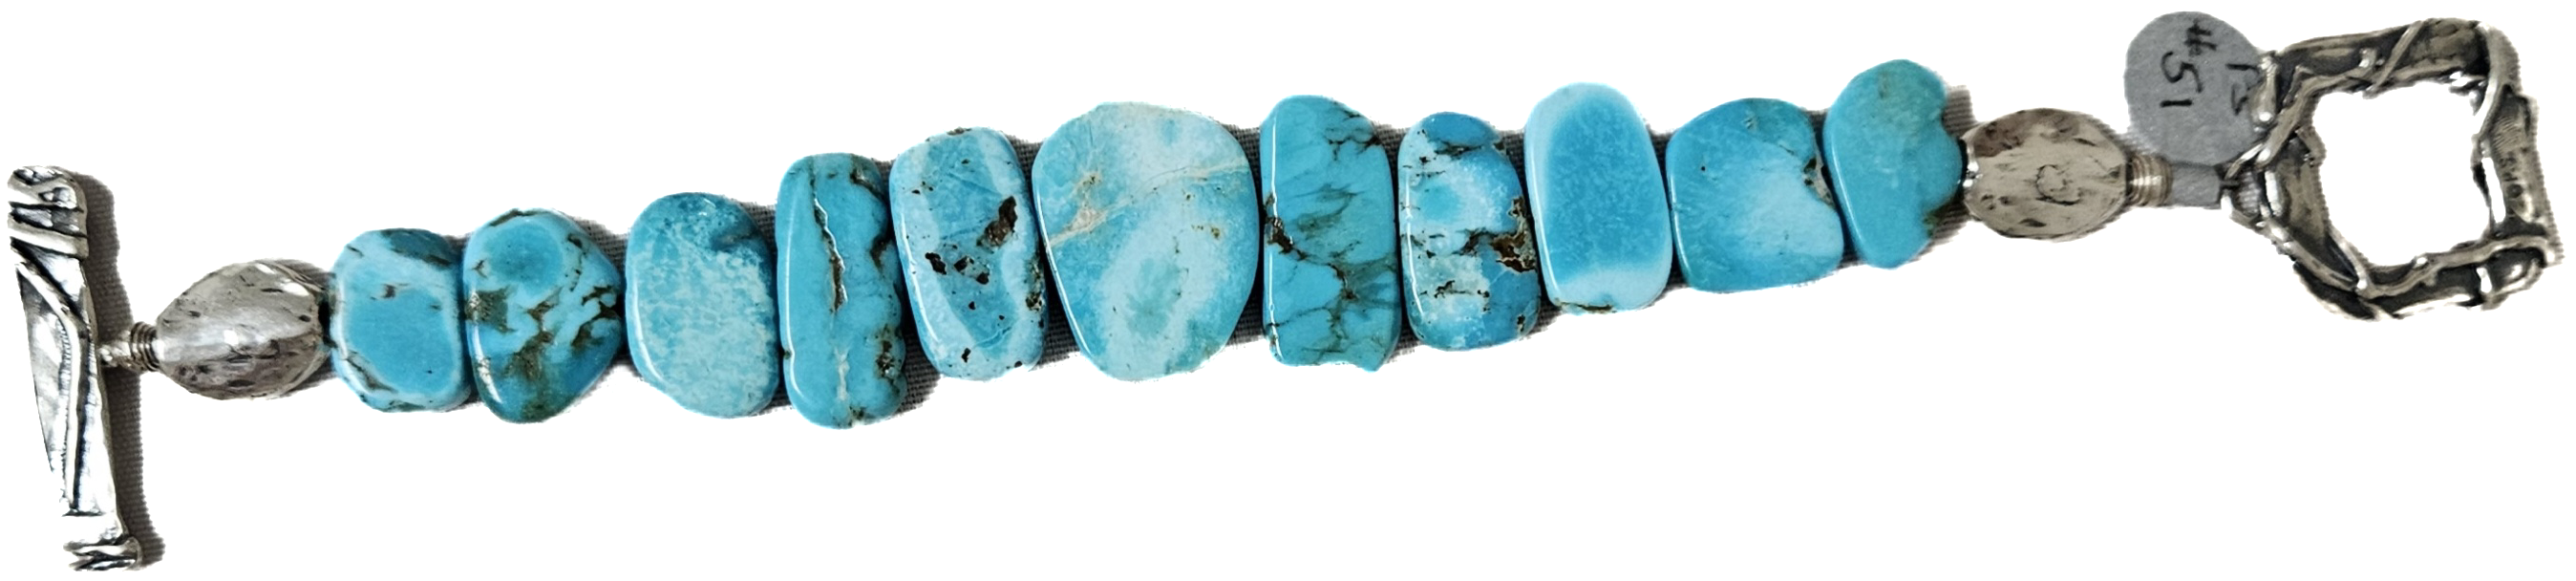 Photo of Turquoise Braceletby Pam Springall